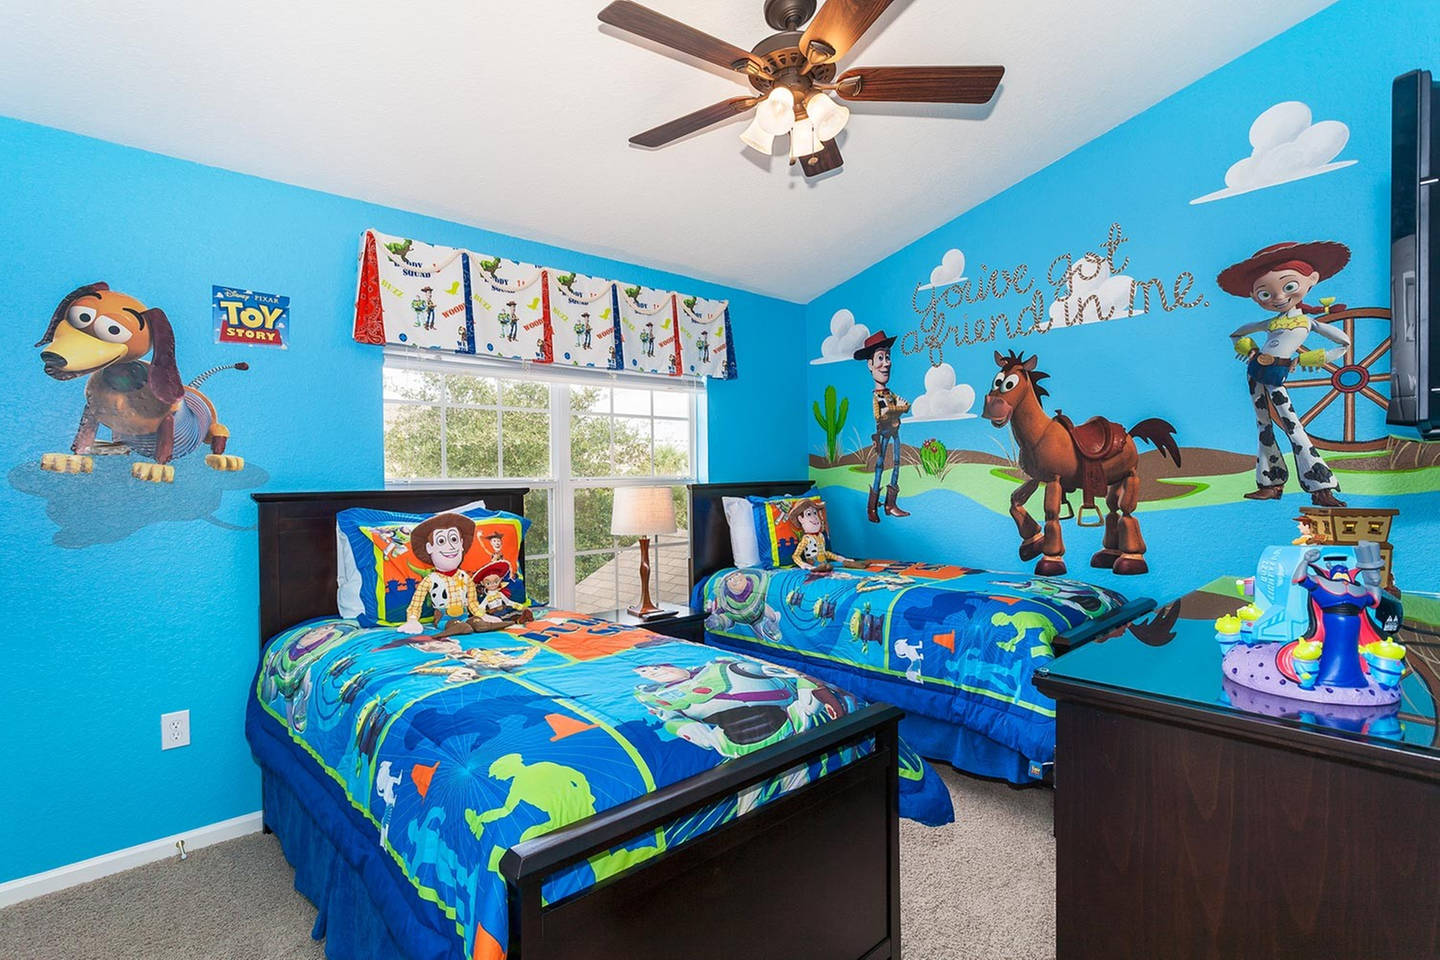 Creative Kids Bedroom Toy Story Inspired Room